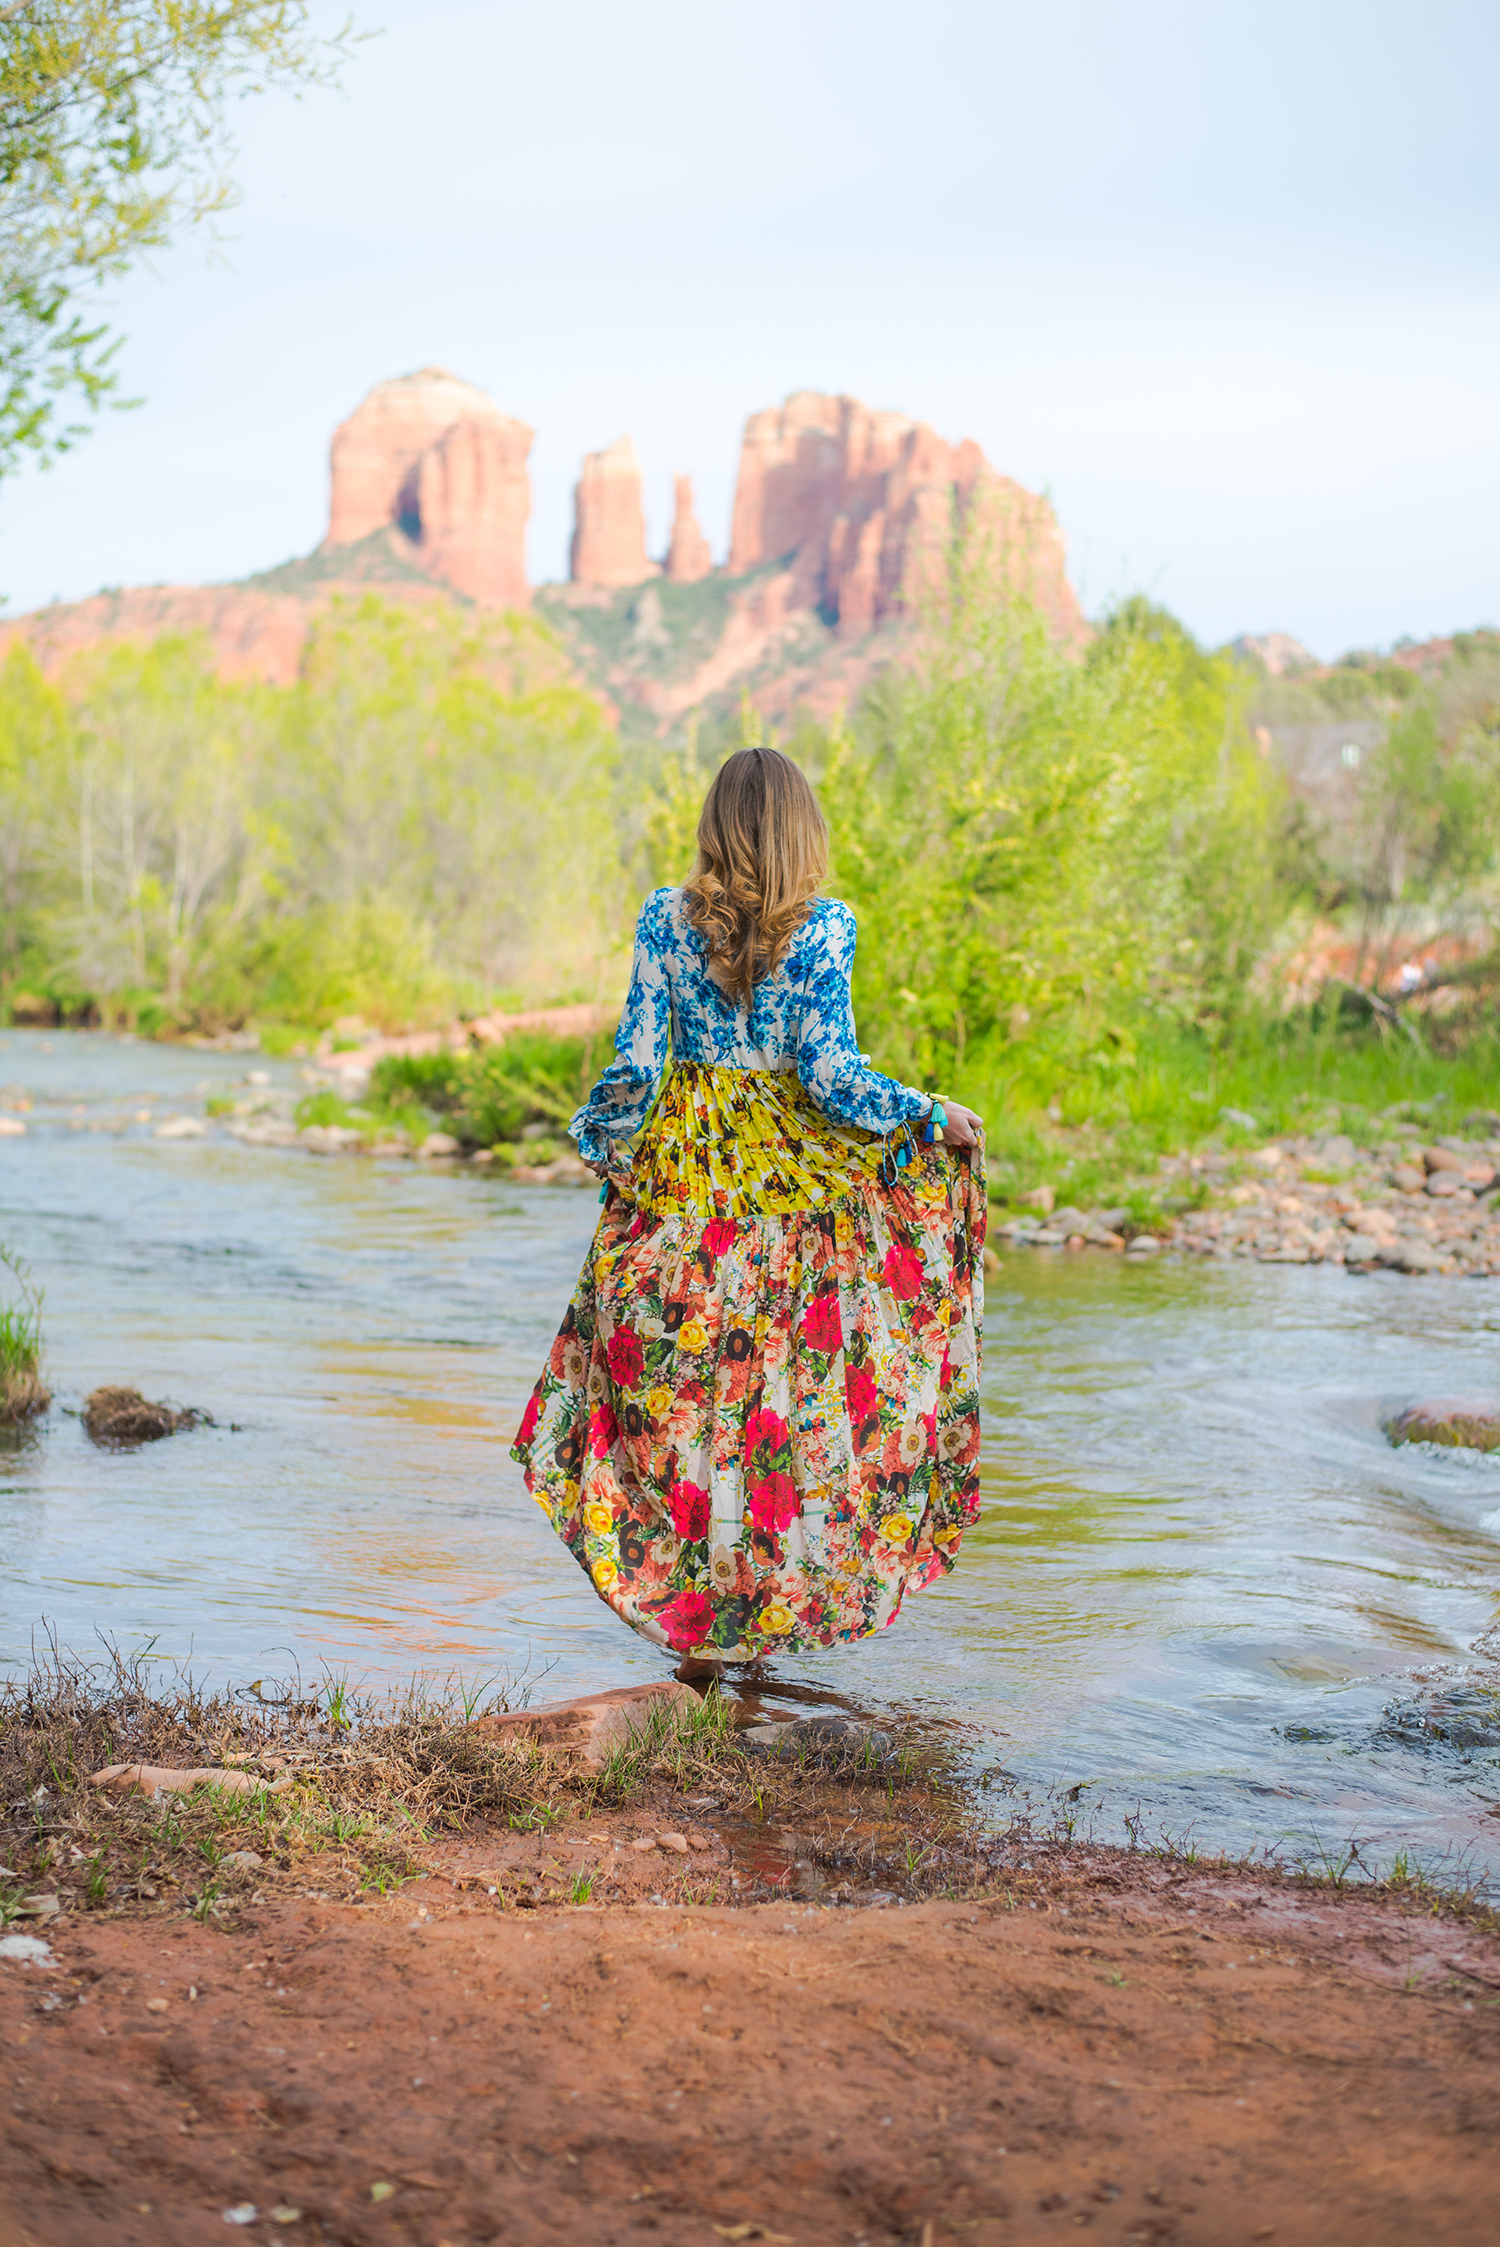 Alyssa Campanella of The A List shares her favorite travels from 2017 in Sedona, Arizona